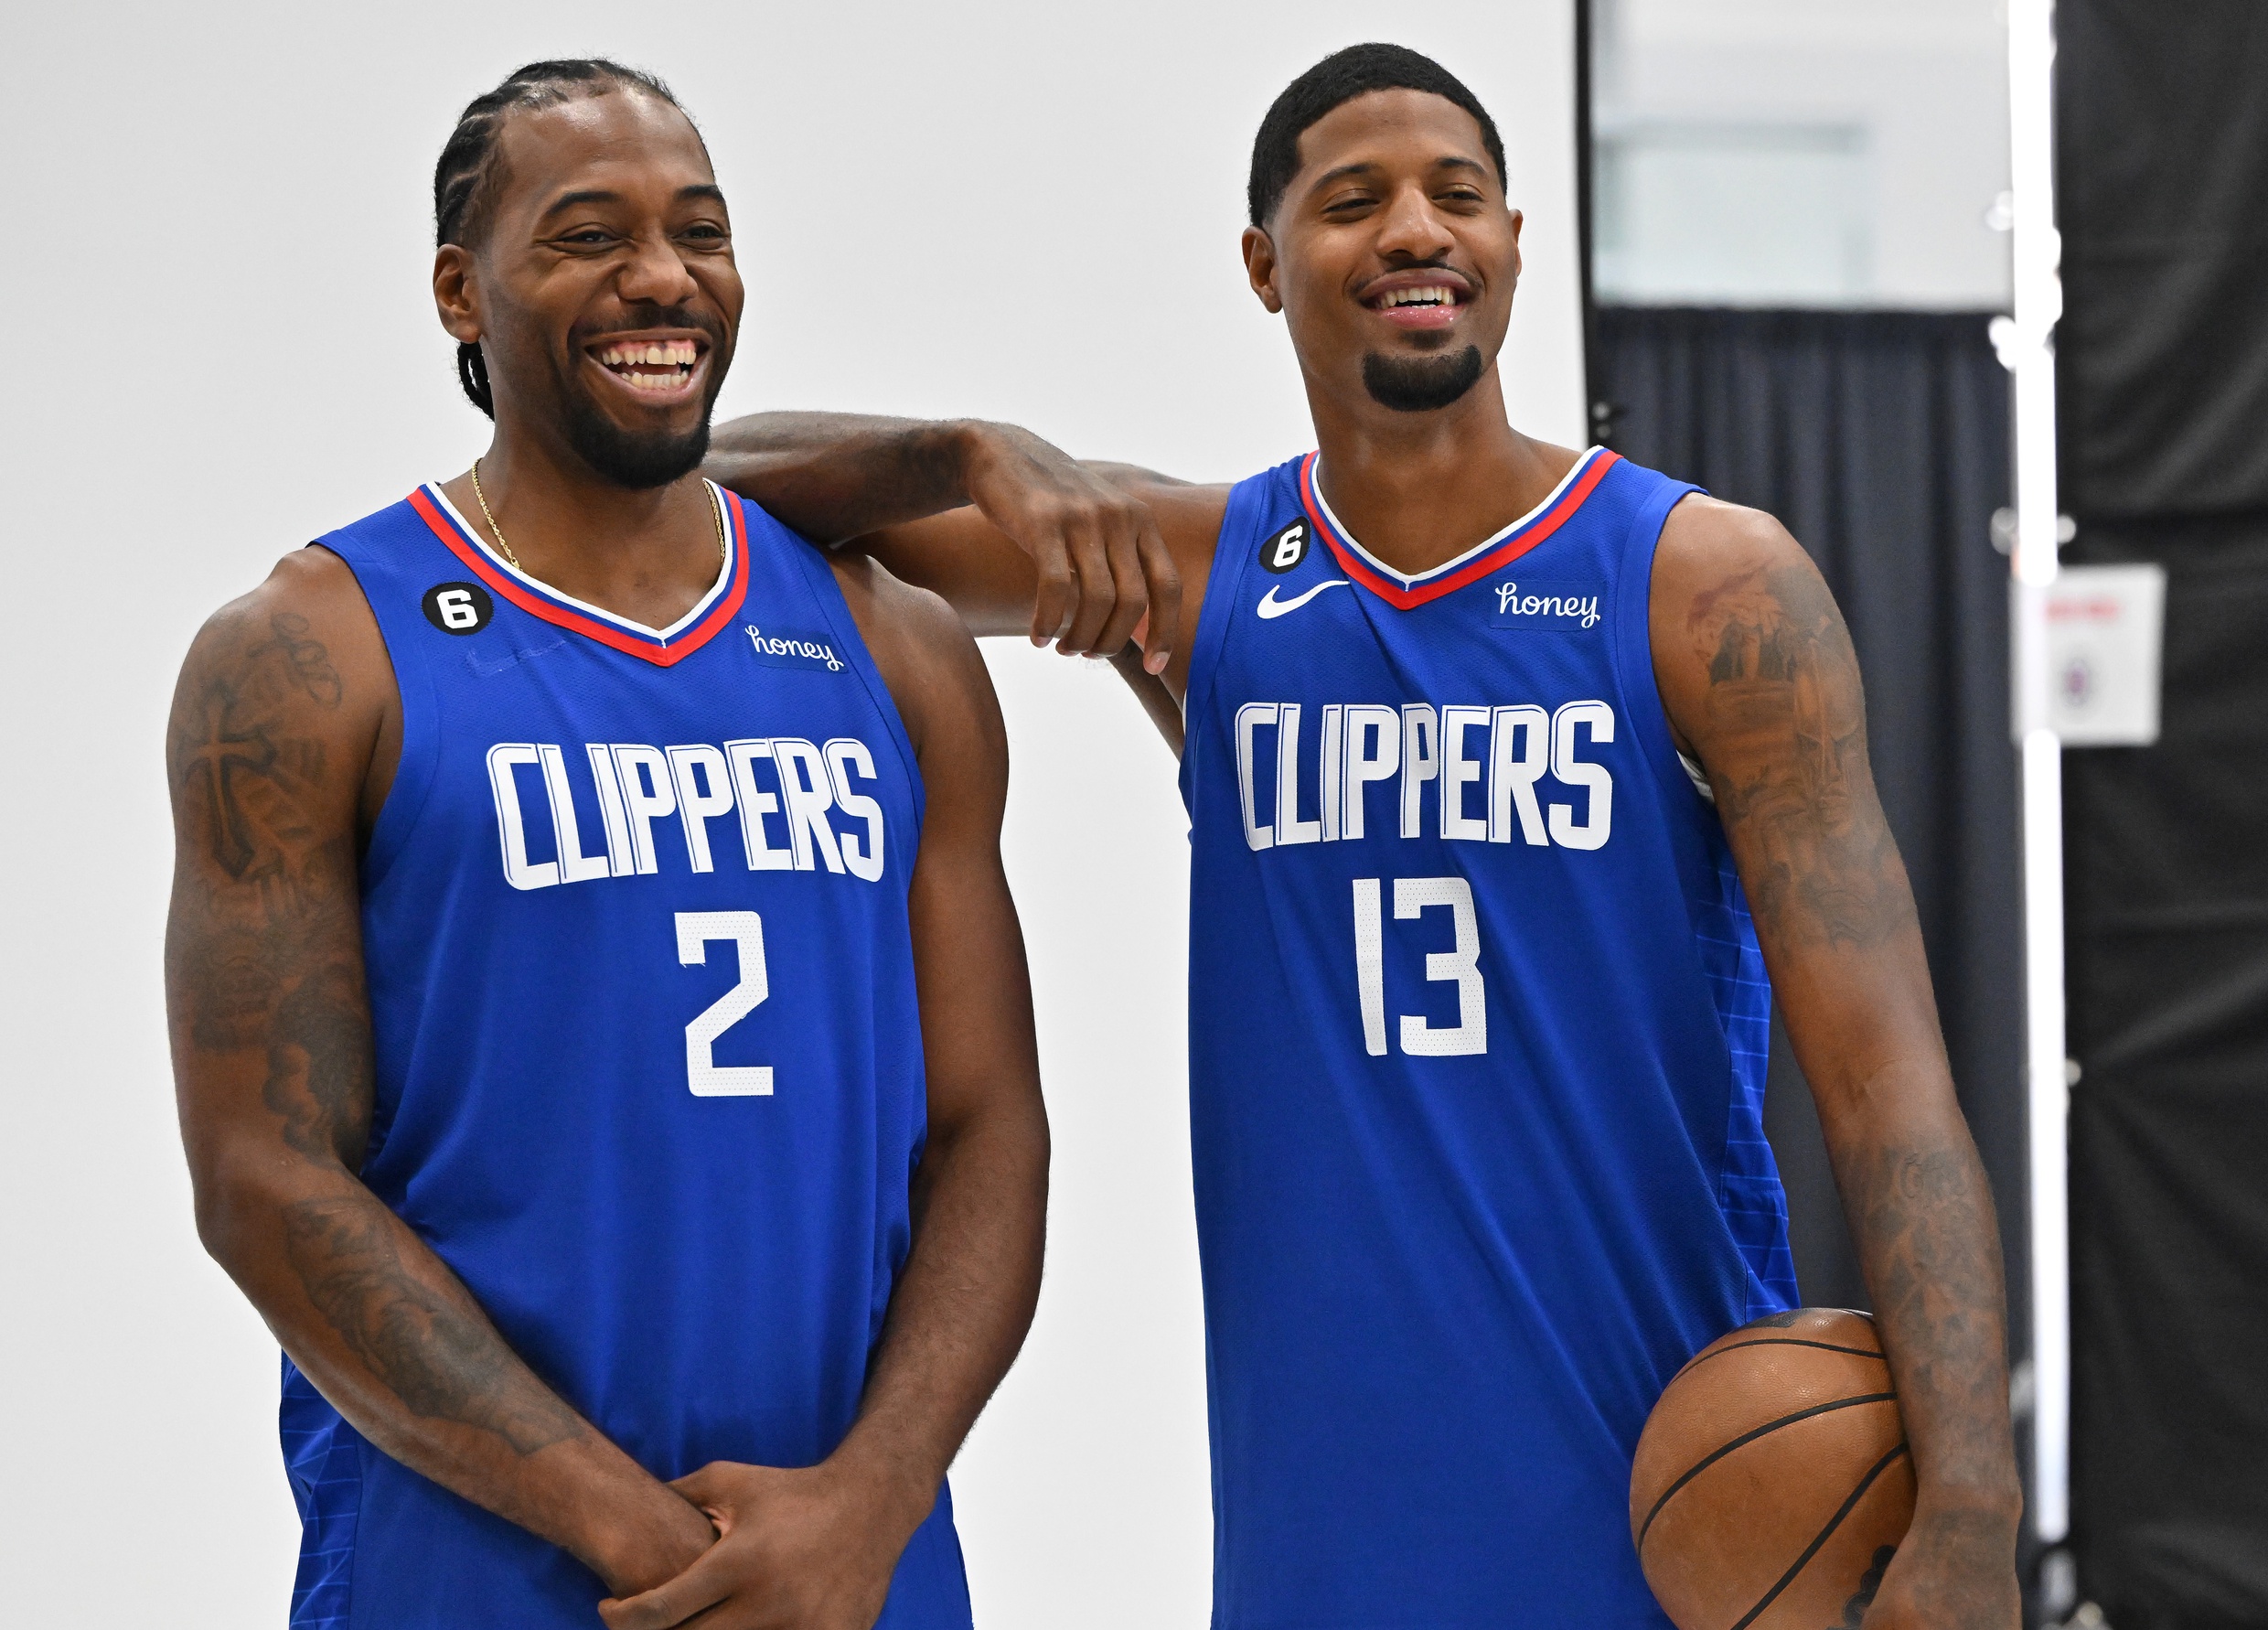 Sep 26, 2022; Playa Vista, CA, USA; Los Angeles Clippers forward Kawhi Leonard (2) and Los Angeles Clippers guard Paul George (13) are photographed on media day at team headquarters in Playa Vista, CA. Mandatory Credit: Jayne Kamin-Oncea-USA TODAY Sports